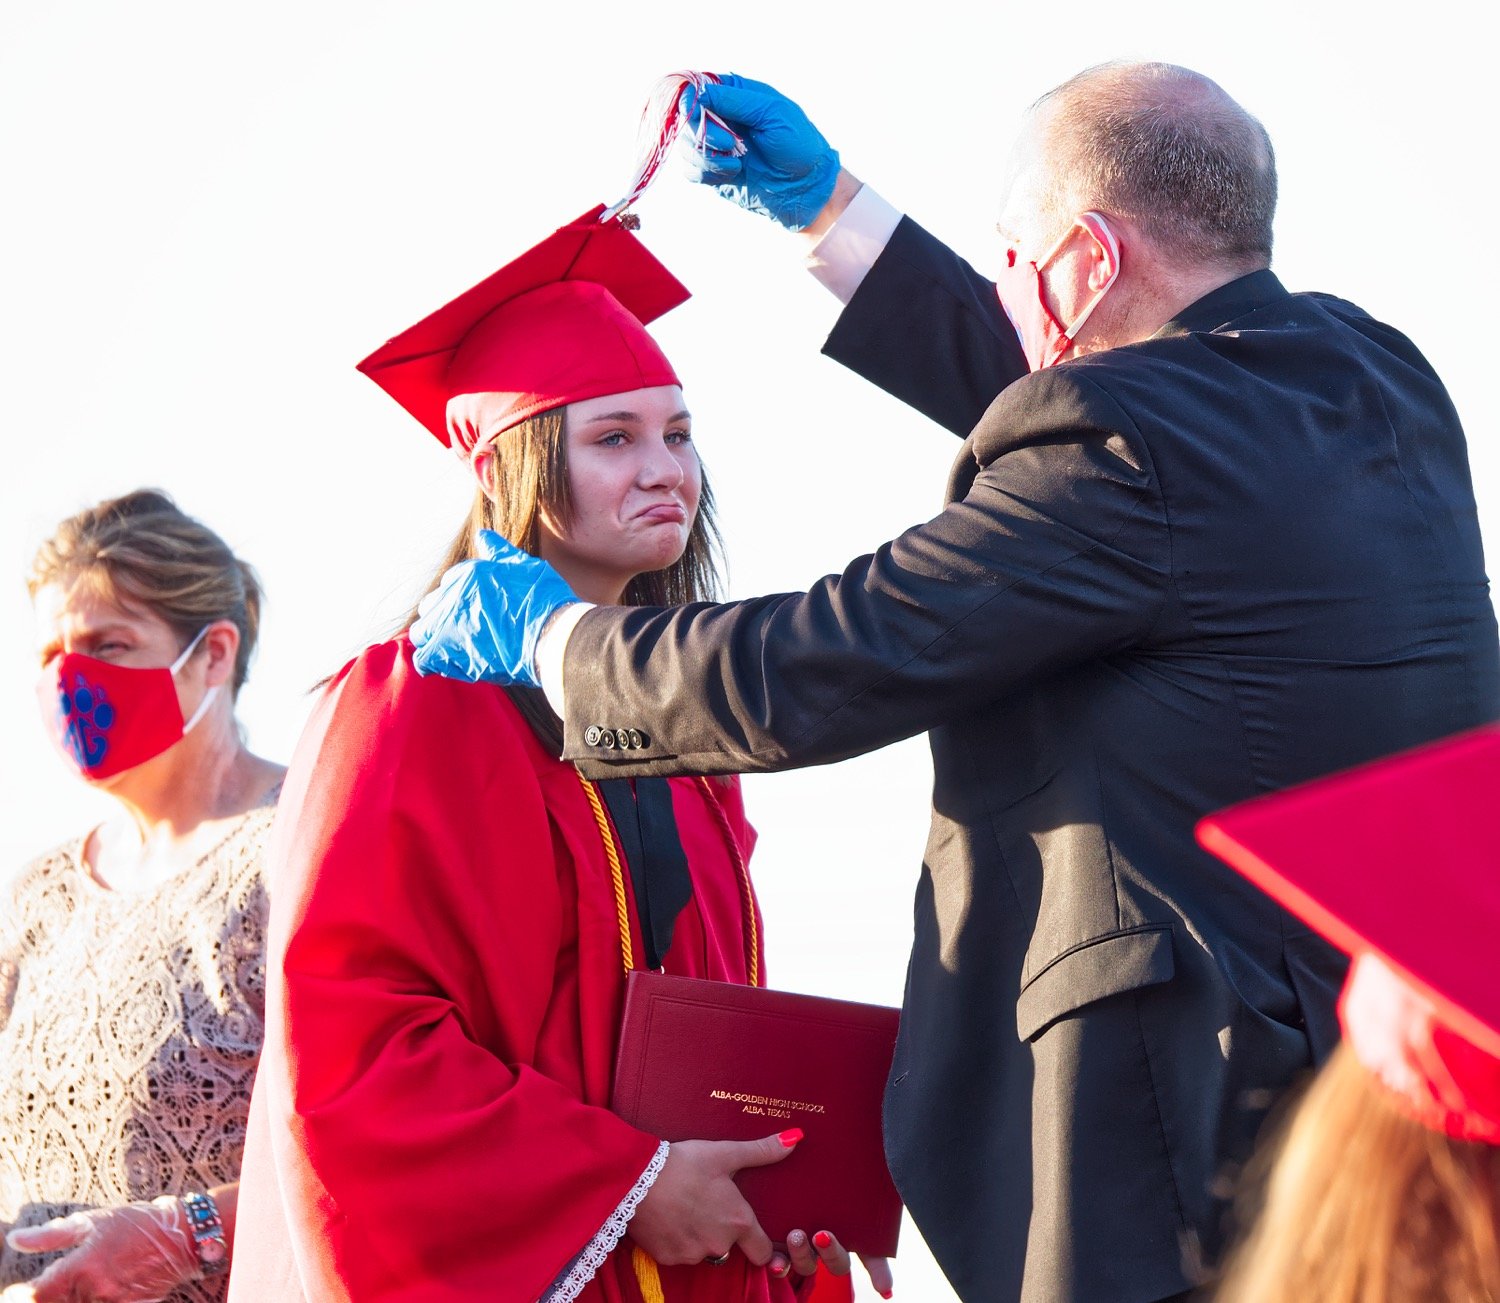 Laynie Culp graduates from Alba-Golden High School. Graduation ceremonies were one of the first major events forced to make significant adjustments around the pandemic. Attendance was limited in Alba-Golden, Mineola and Quitman.